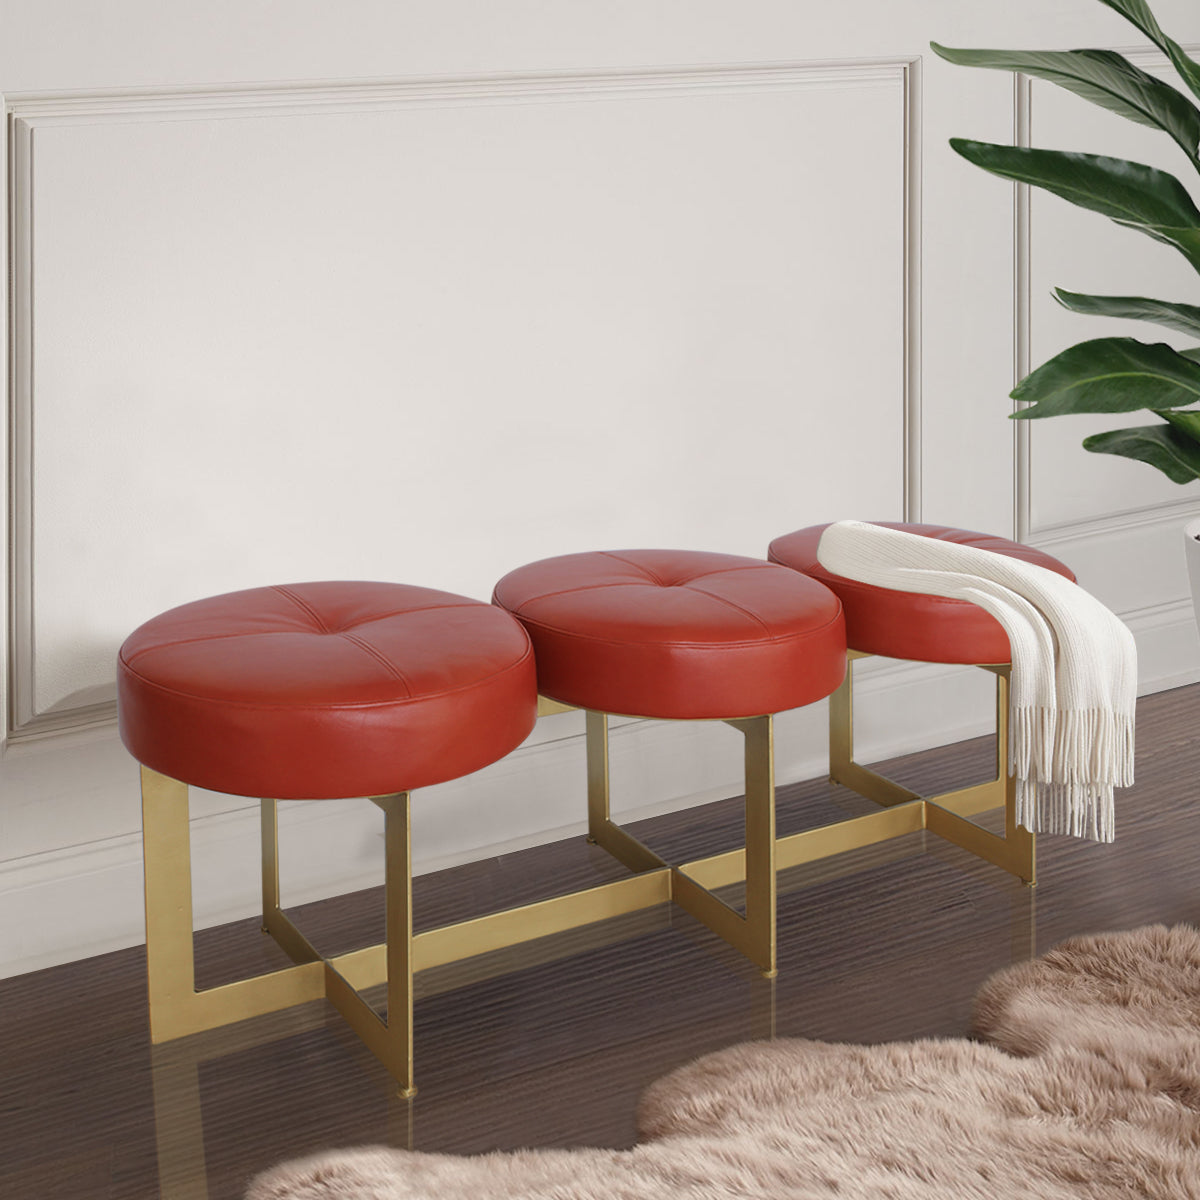 A modern metal golden bench topped with three round cushions upholstered in red leather